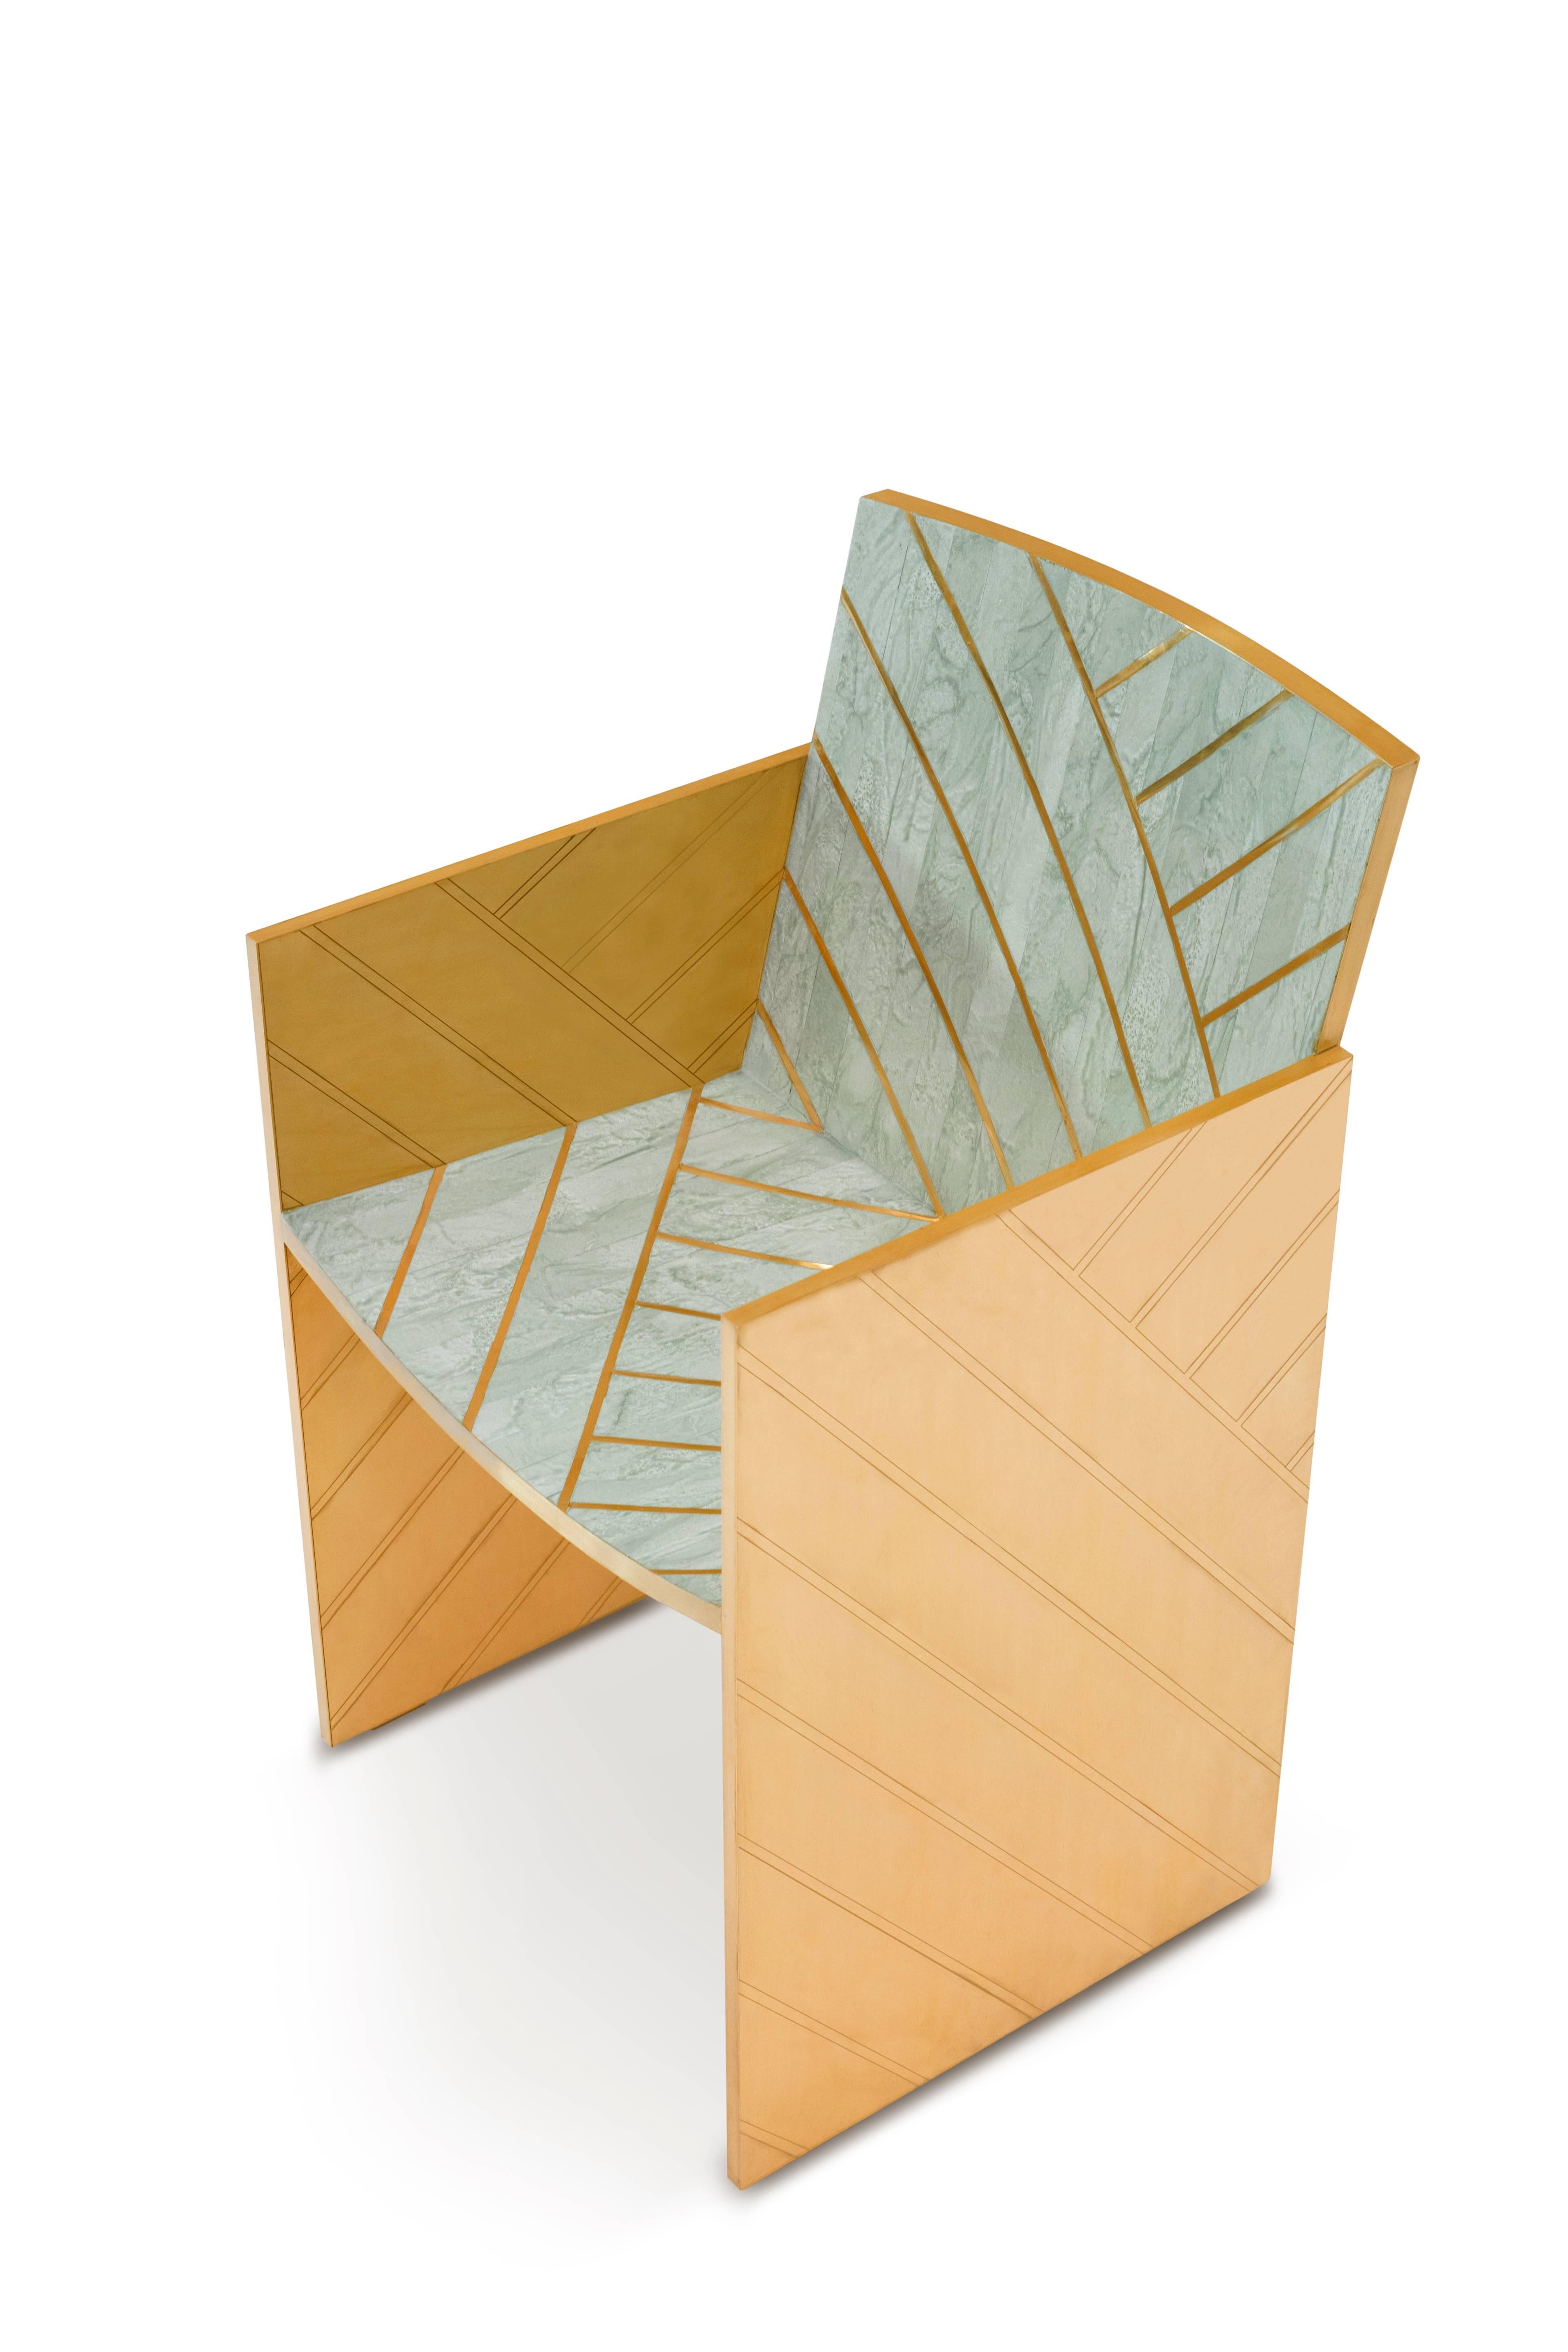 Geometry is truly fascinating, unexpected forms from Matteo Cibic, transgress the monotony of straight lines set in gold on a bed of pearl and lacquered brass in stylish, which hues.

Nesso dining chair mint is a beautiful dining chair in pearly